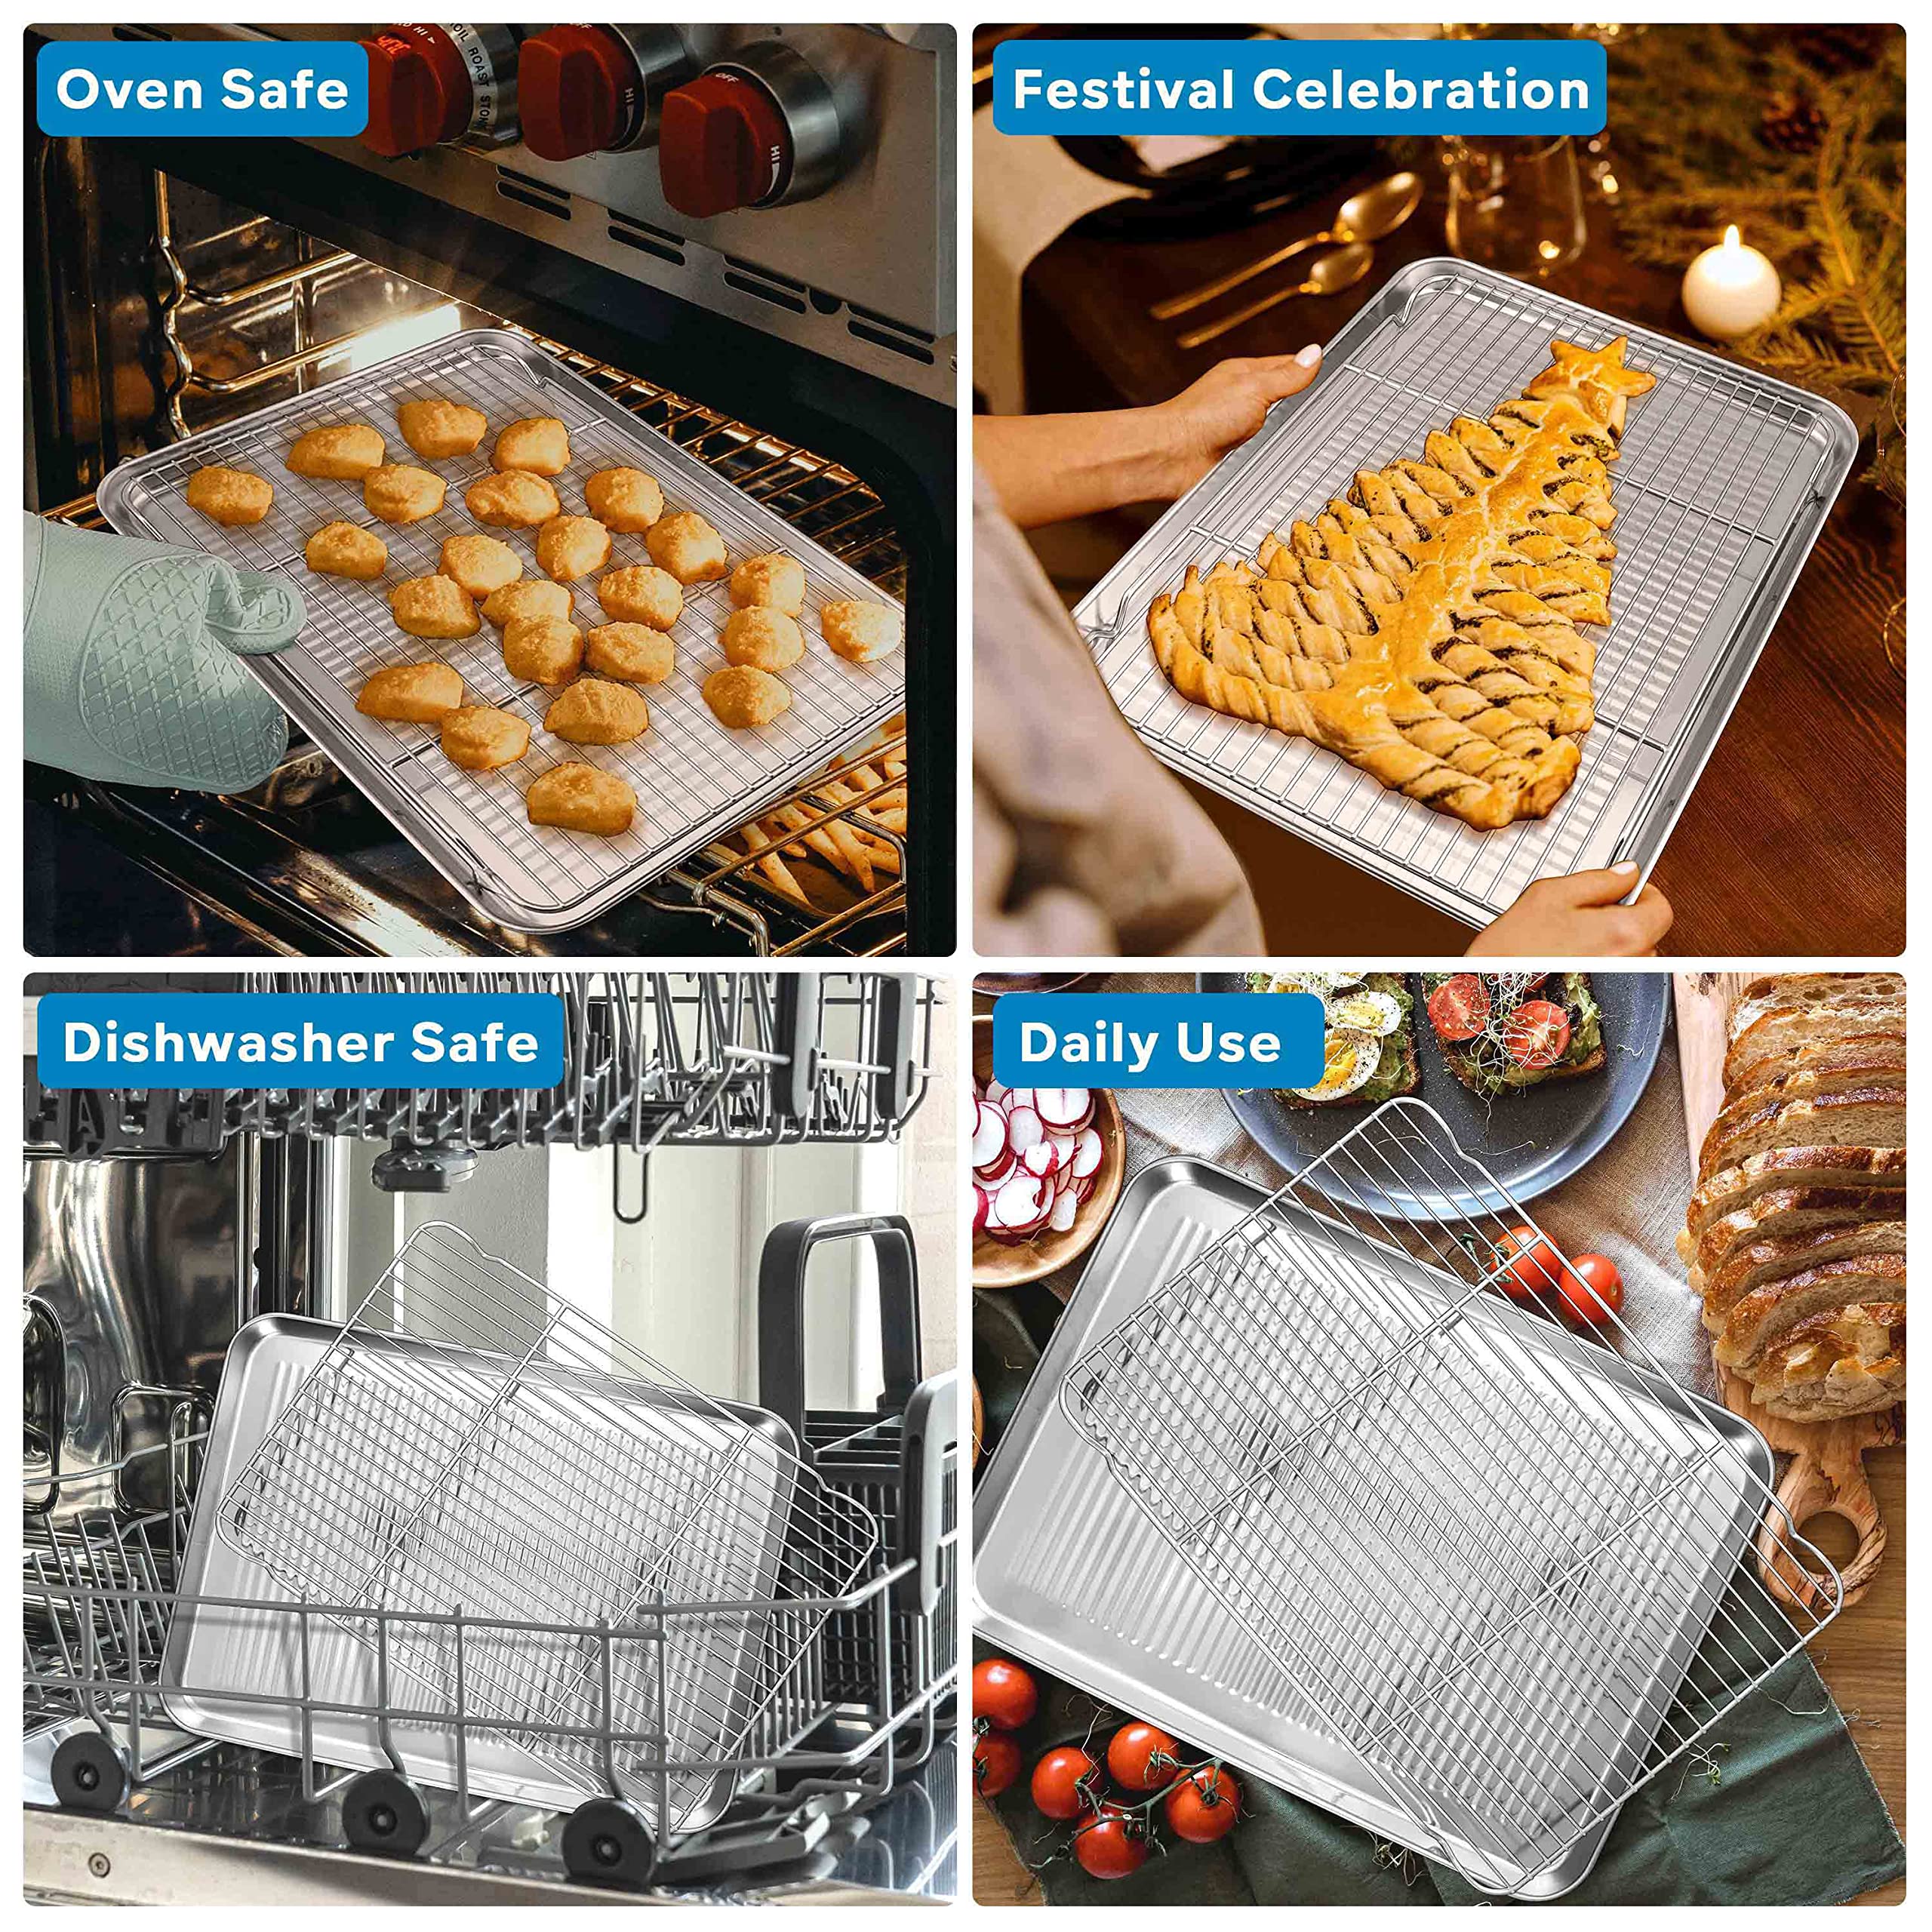 Herogo Baking Pan Sheet with Cooling Rack Set for Oven, 18 x 13 x 1 Inch, Stainless Steel Fluted Bakeware Cookie Sheet Tray Non-stick, Dishwasher Safe